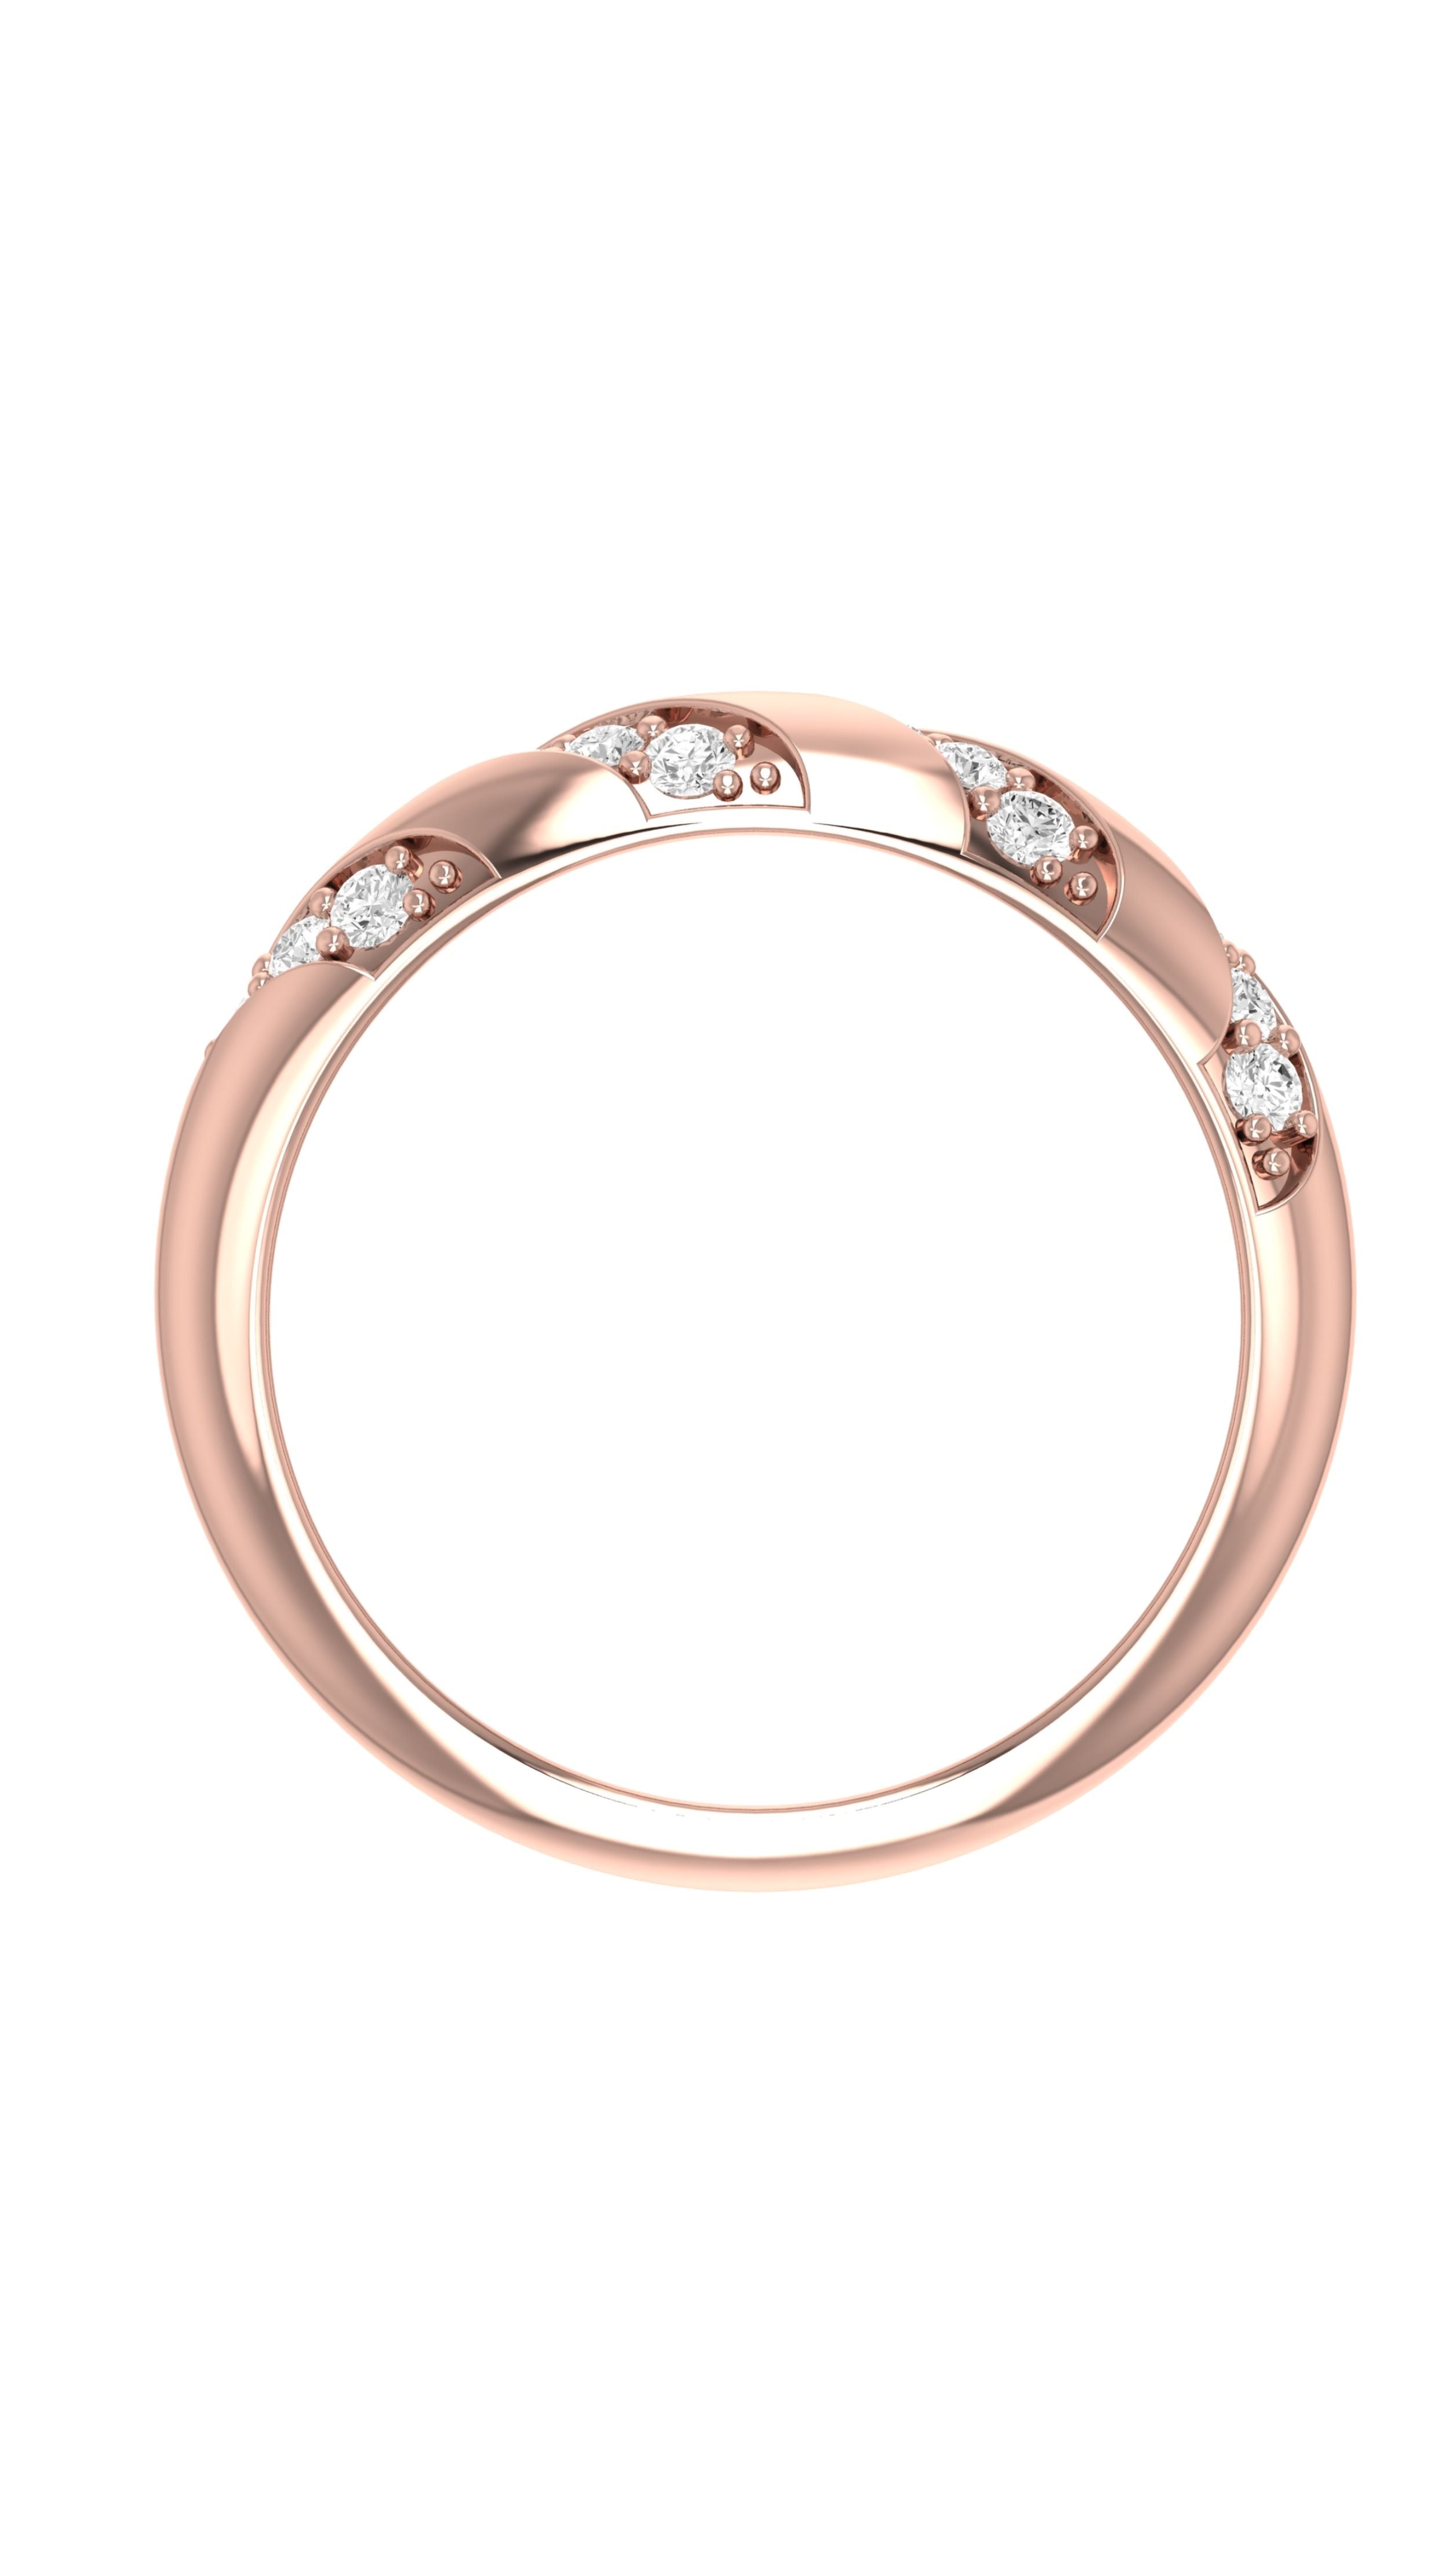 Conde de diamante Elisa ring. The Elisa Ring features a stunning twist of 18K rose gold, adorned with a pave of sparkling diamonds. Delicately rounded and elegant. Shown from the side view.